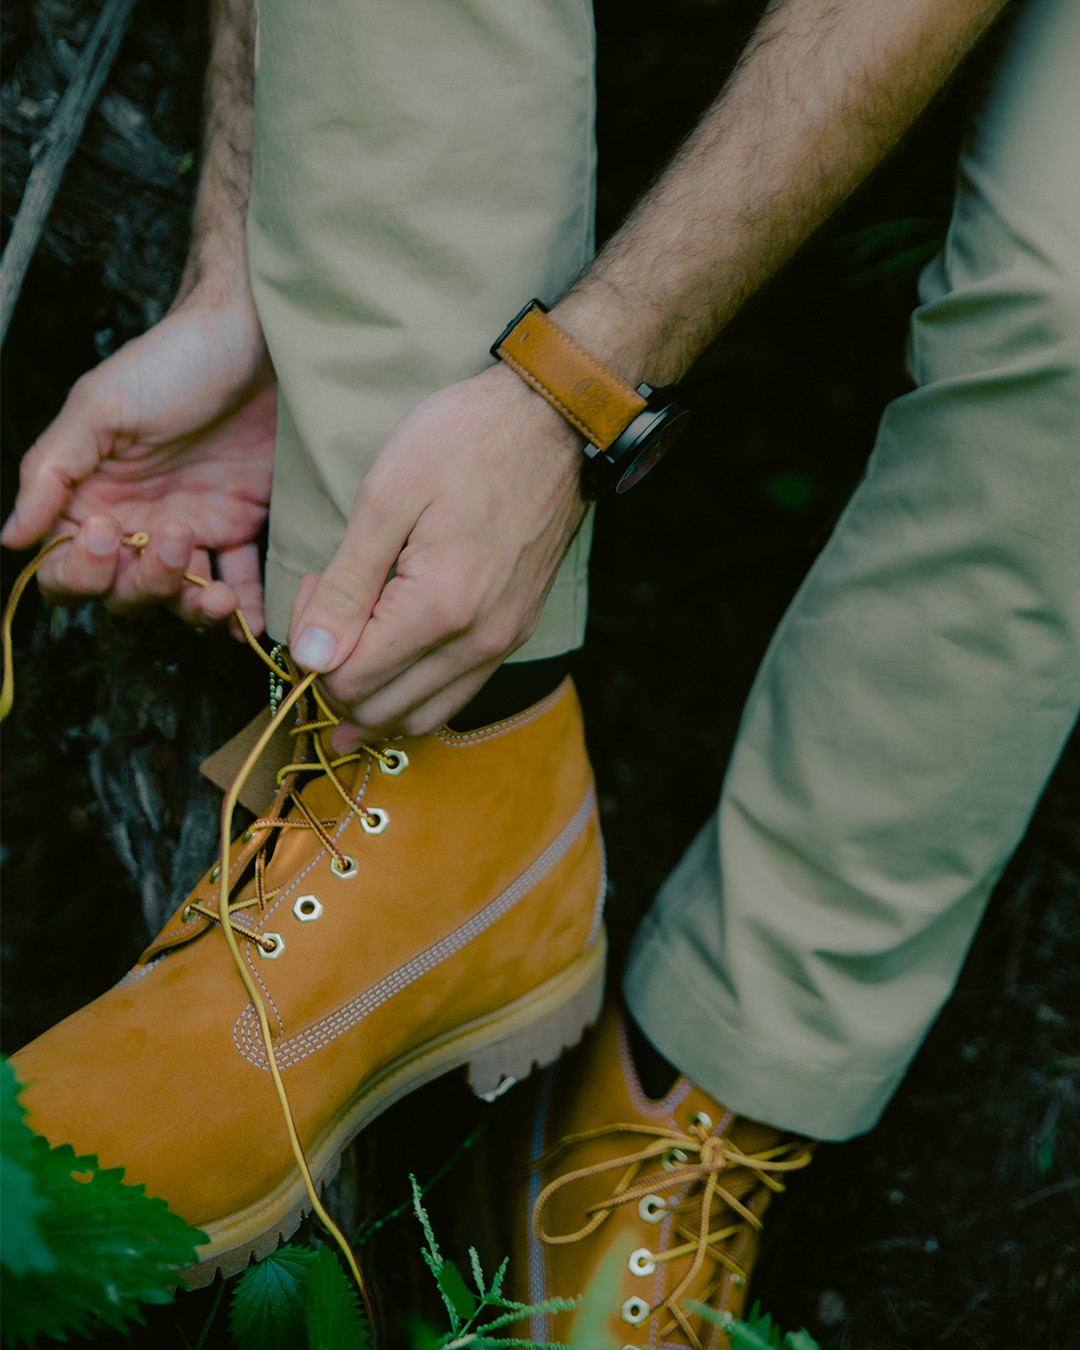 Made with nature in mind

#timberland #summercollection